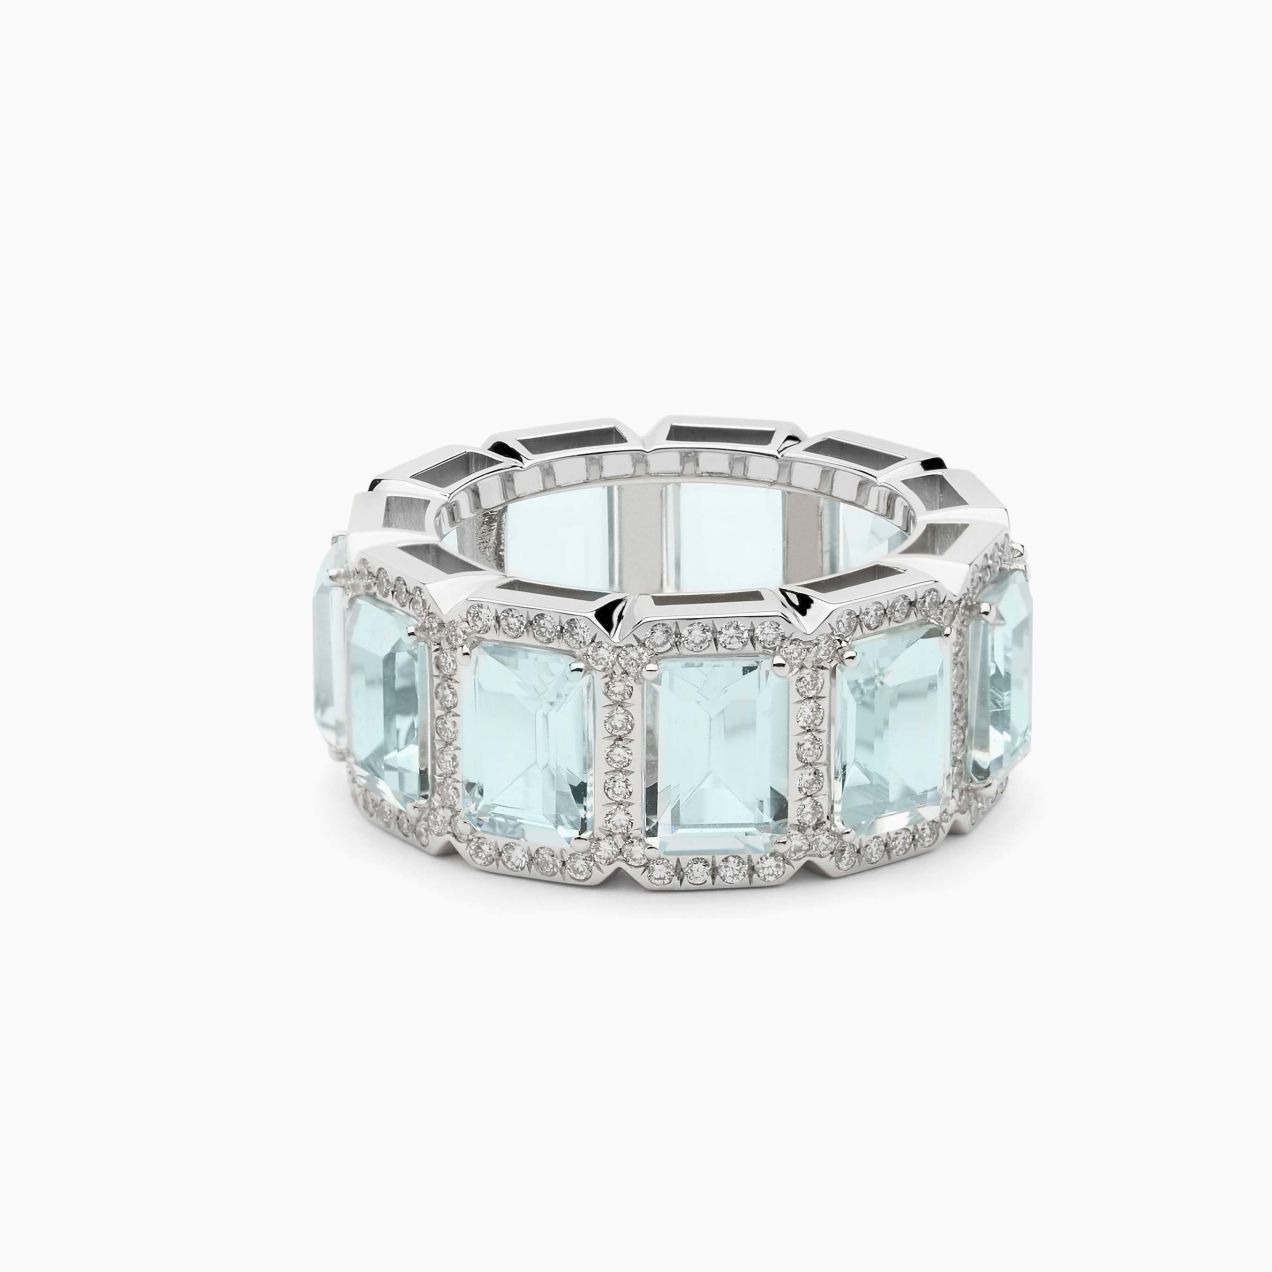 White gold with aquamarines with octagonal size and border with diamonds ring